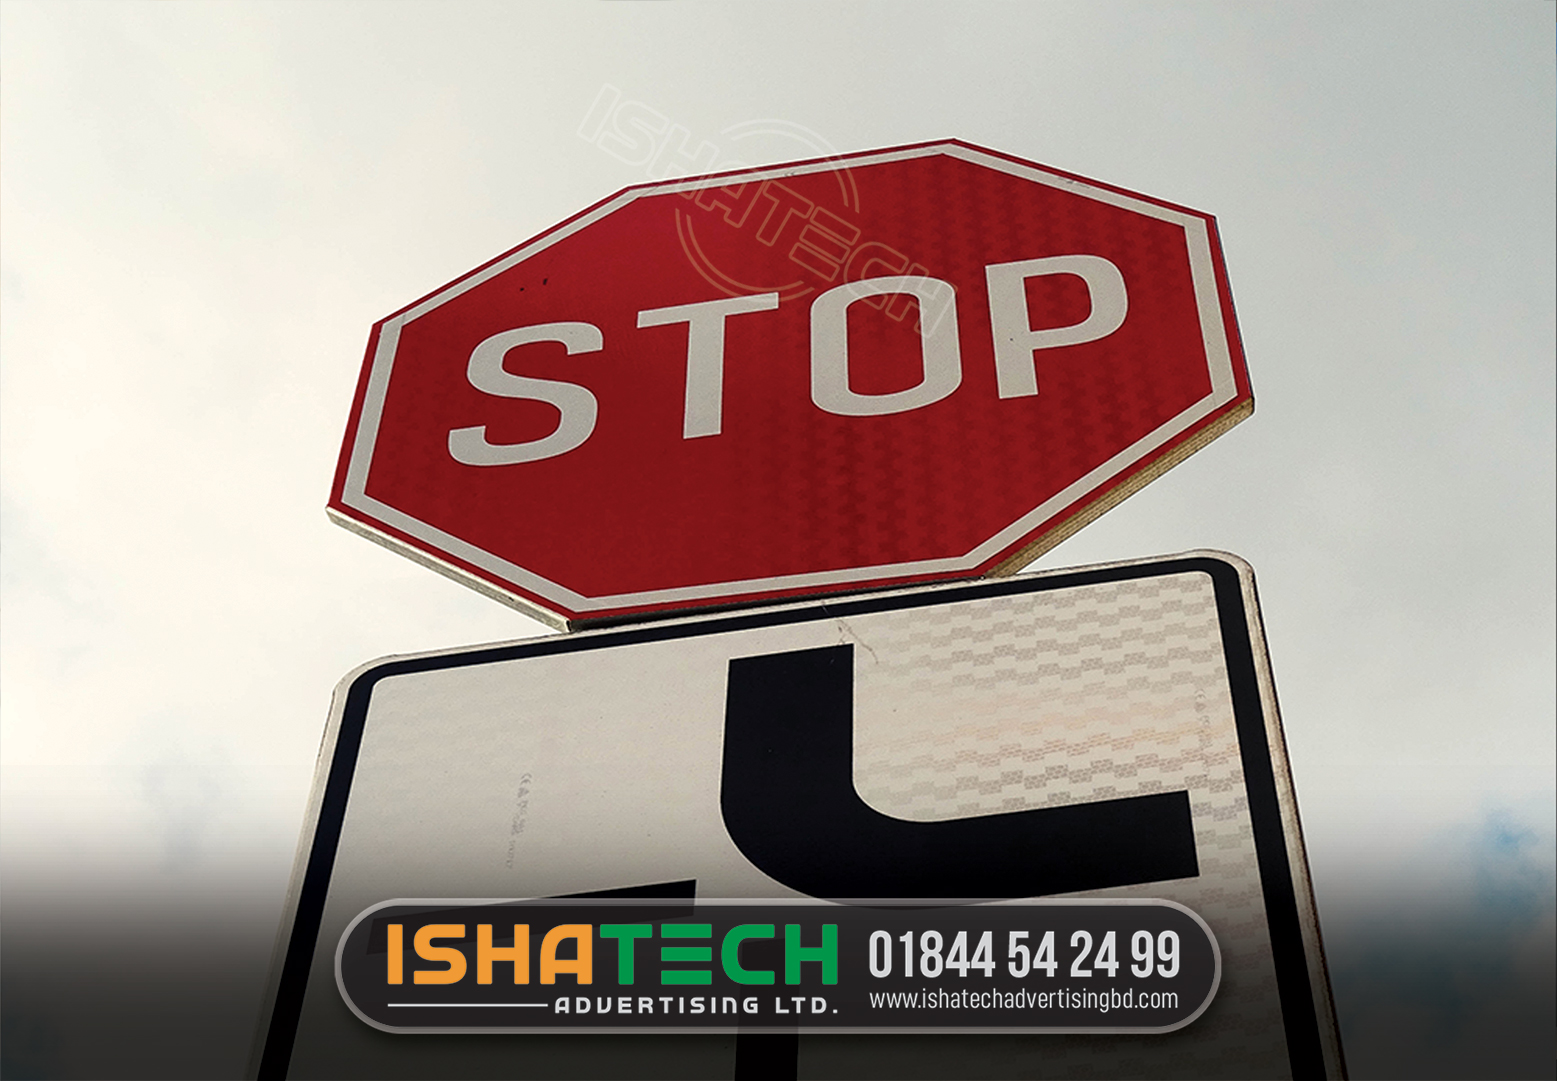 ROAD SIDE STOP SIGNS, SIGNPOST SAFETY, CONTROL SIGNS MAKING BY ISHATECH ADVERTISING LTD | Best LED Sign & High-Quality Digital Signage Maker Companies in Bangladesh for our customers since 2012 in Dhaka, Bangladesh